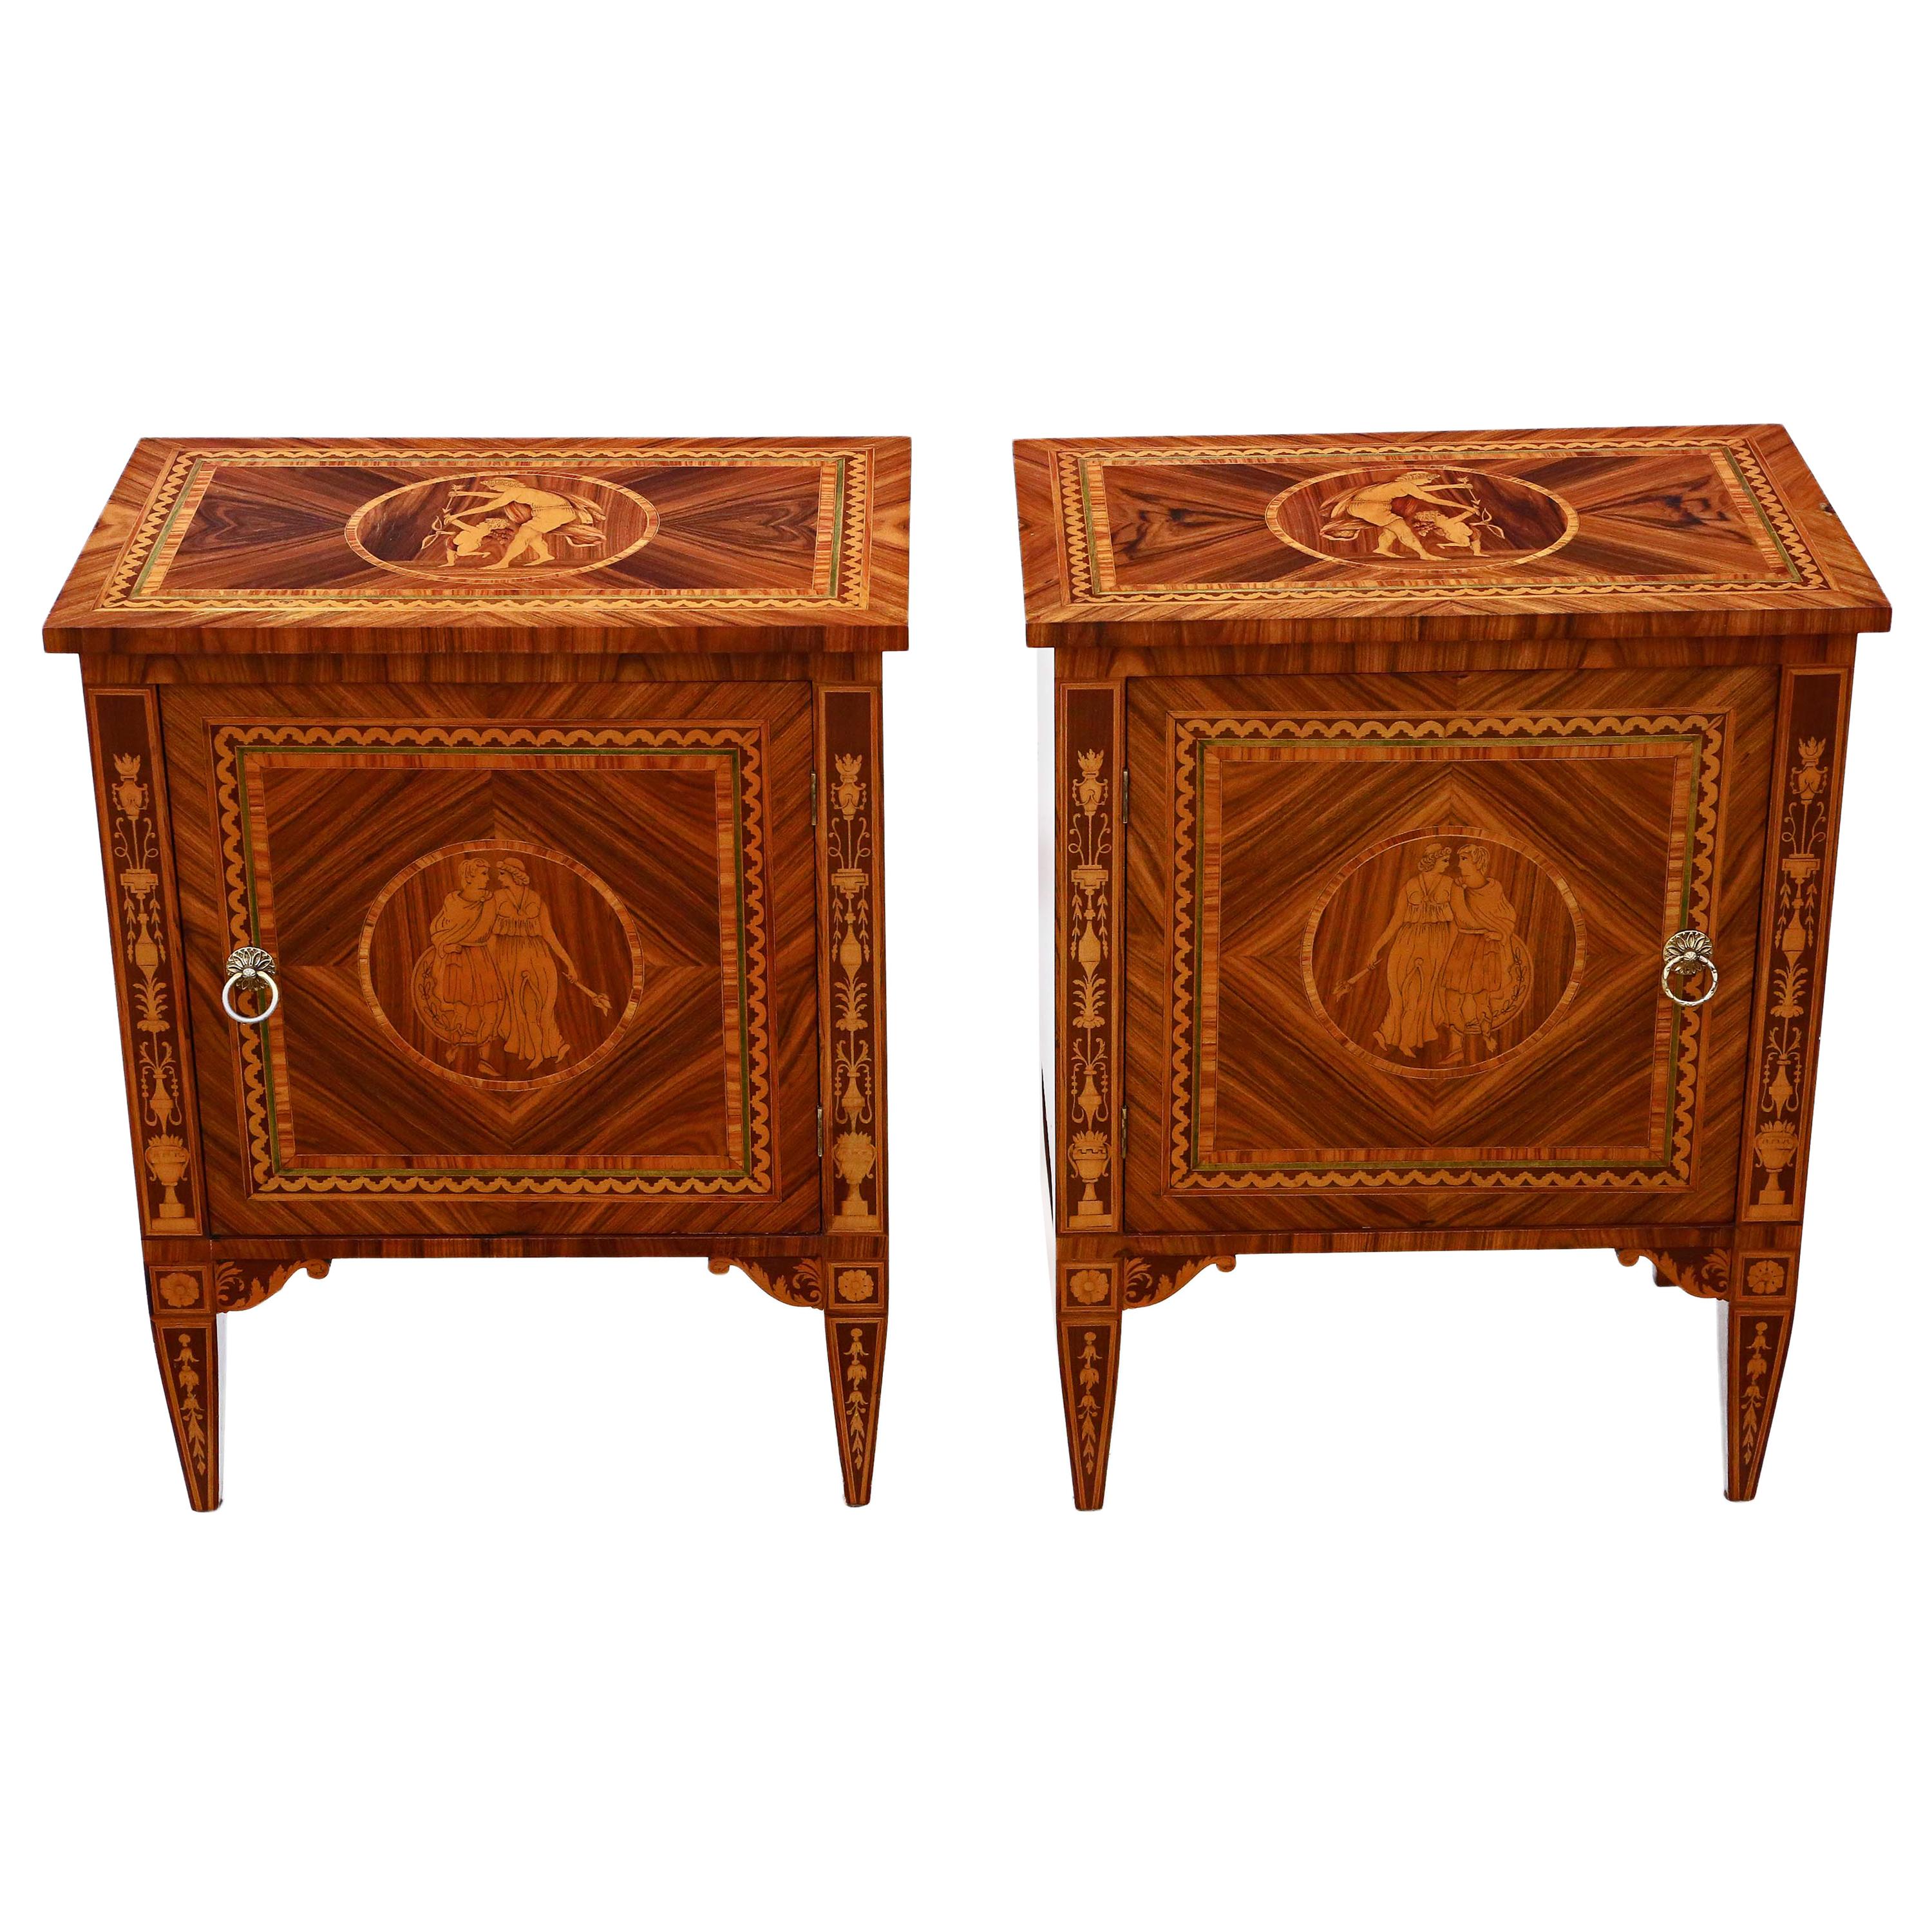 Pair of Marquetry Bedside Tables Cupboards